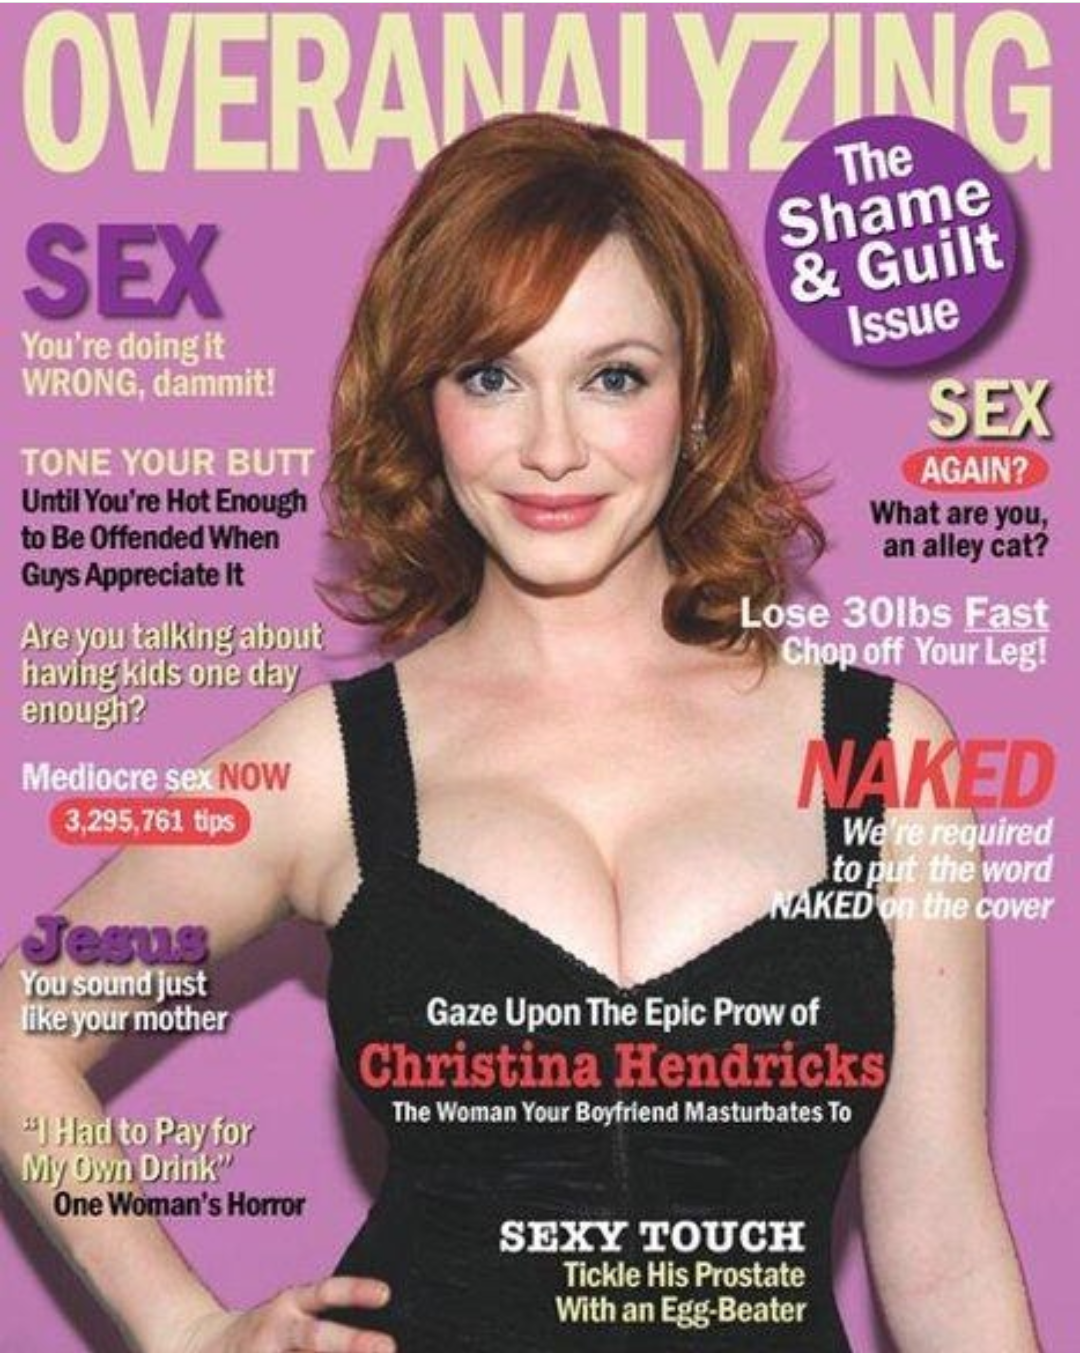 women's magazine cover - Overanalyzing Sex The Shame & Guilt Issue You're doing it Wrong, dammit! Tone Your Butt Until You're Hot Enough to Be Offended When Guys Appreciate it Are you talking about Having kids one day enough? Mediocre sex Now 3,295,761 ti